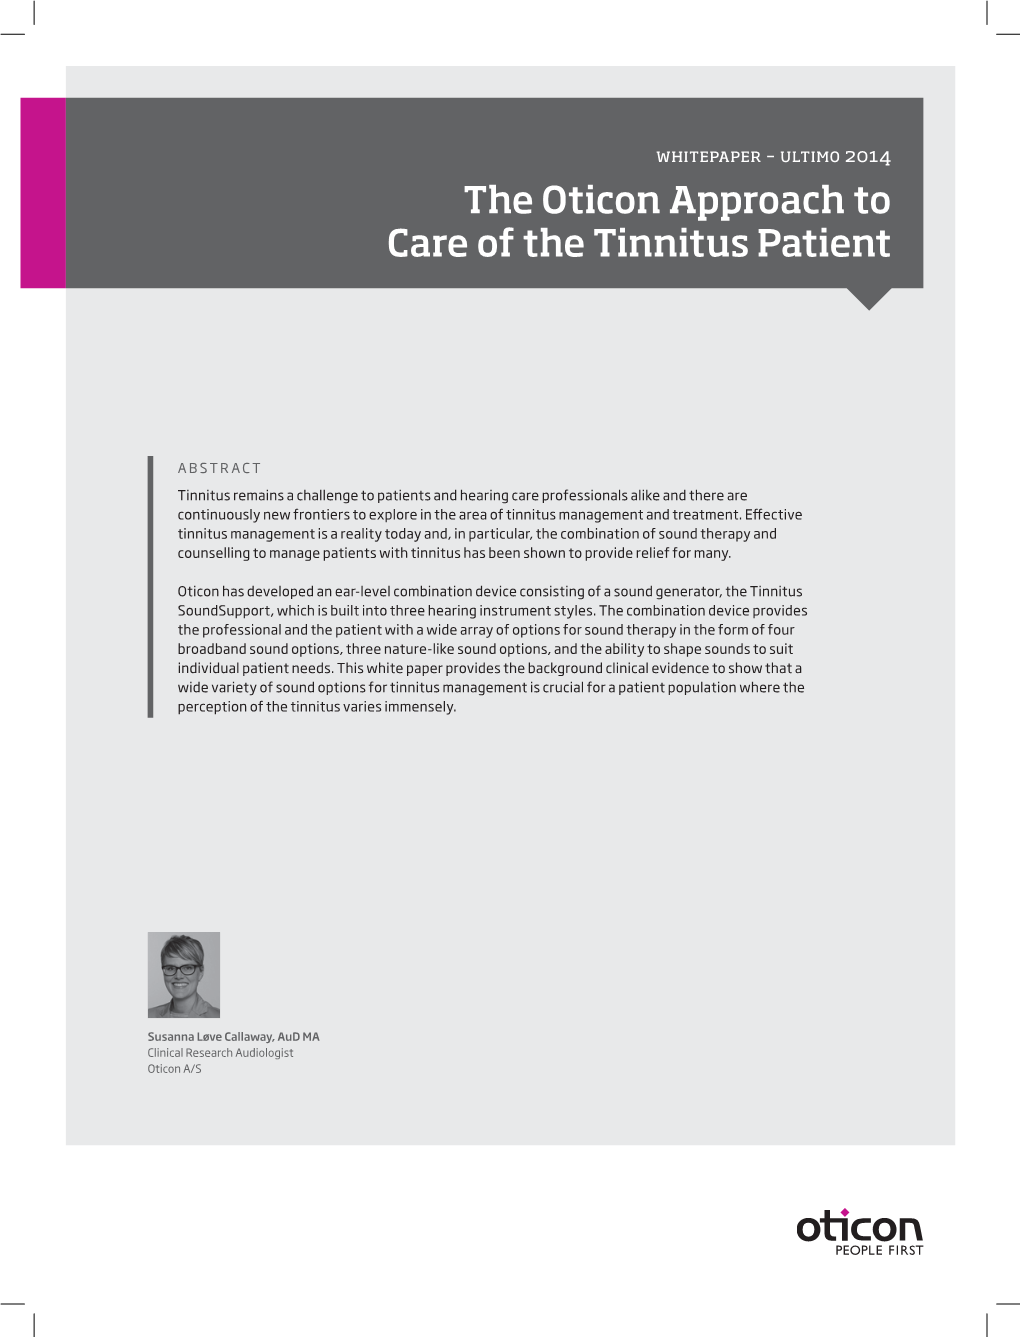 The Oticon Approach to Care of the Tinnitus Patient